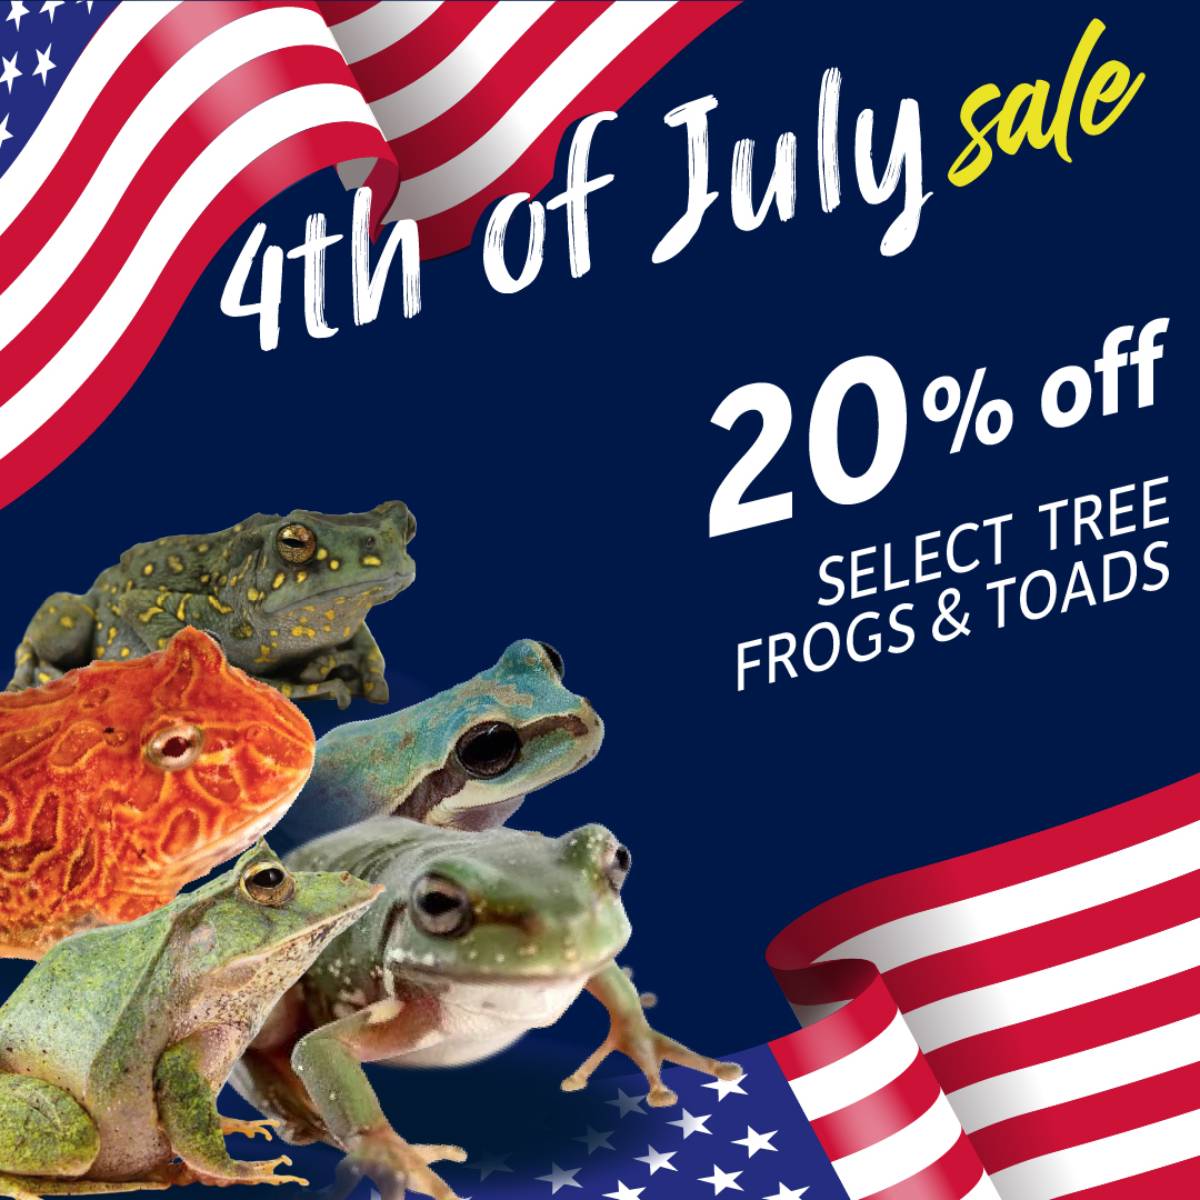 Save 20% on select tree frogs and toads.